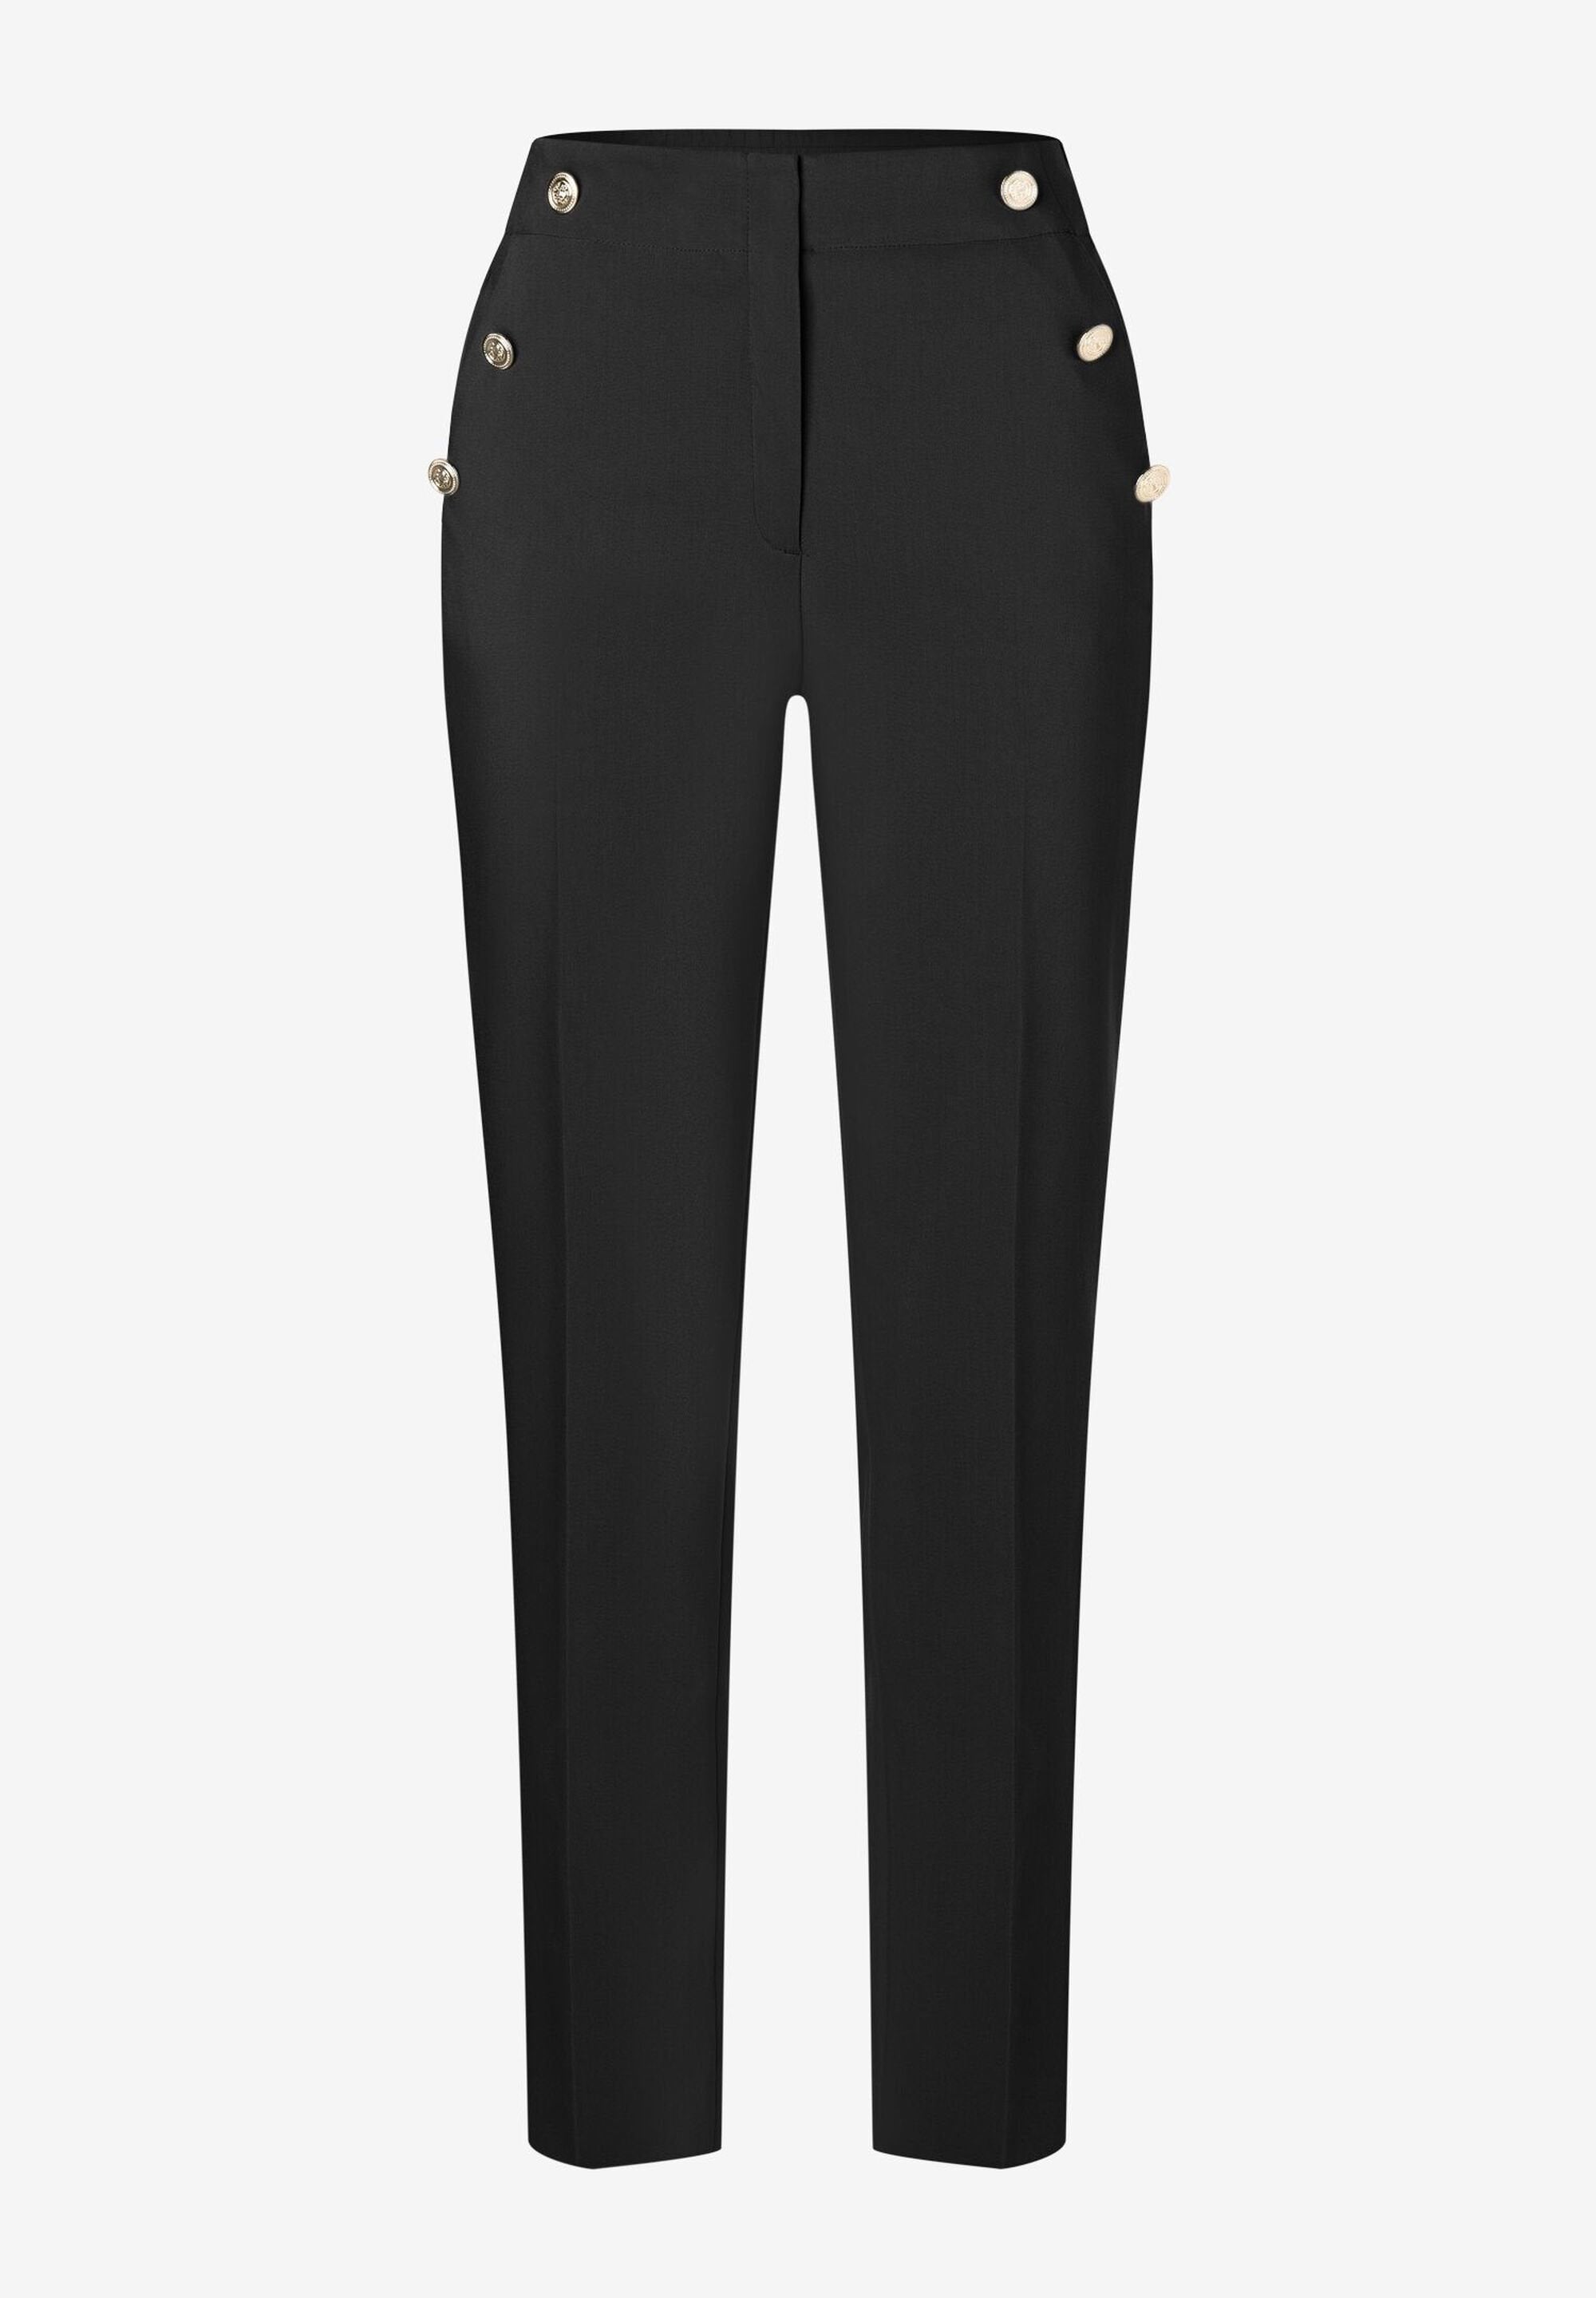 Black Slim Fit Dress Trousers With Decorative Buttons_31084055_0790_03